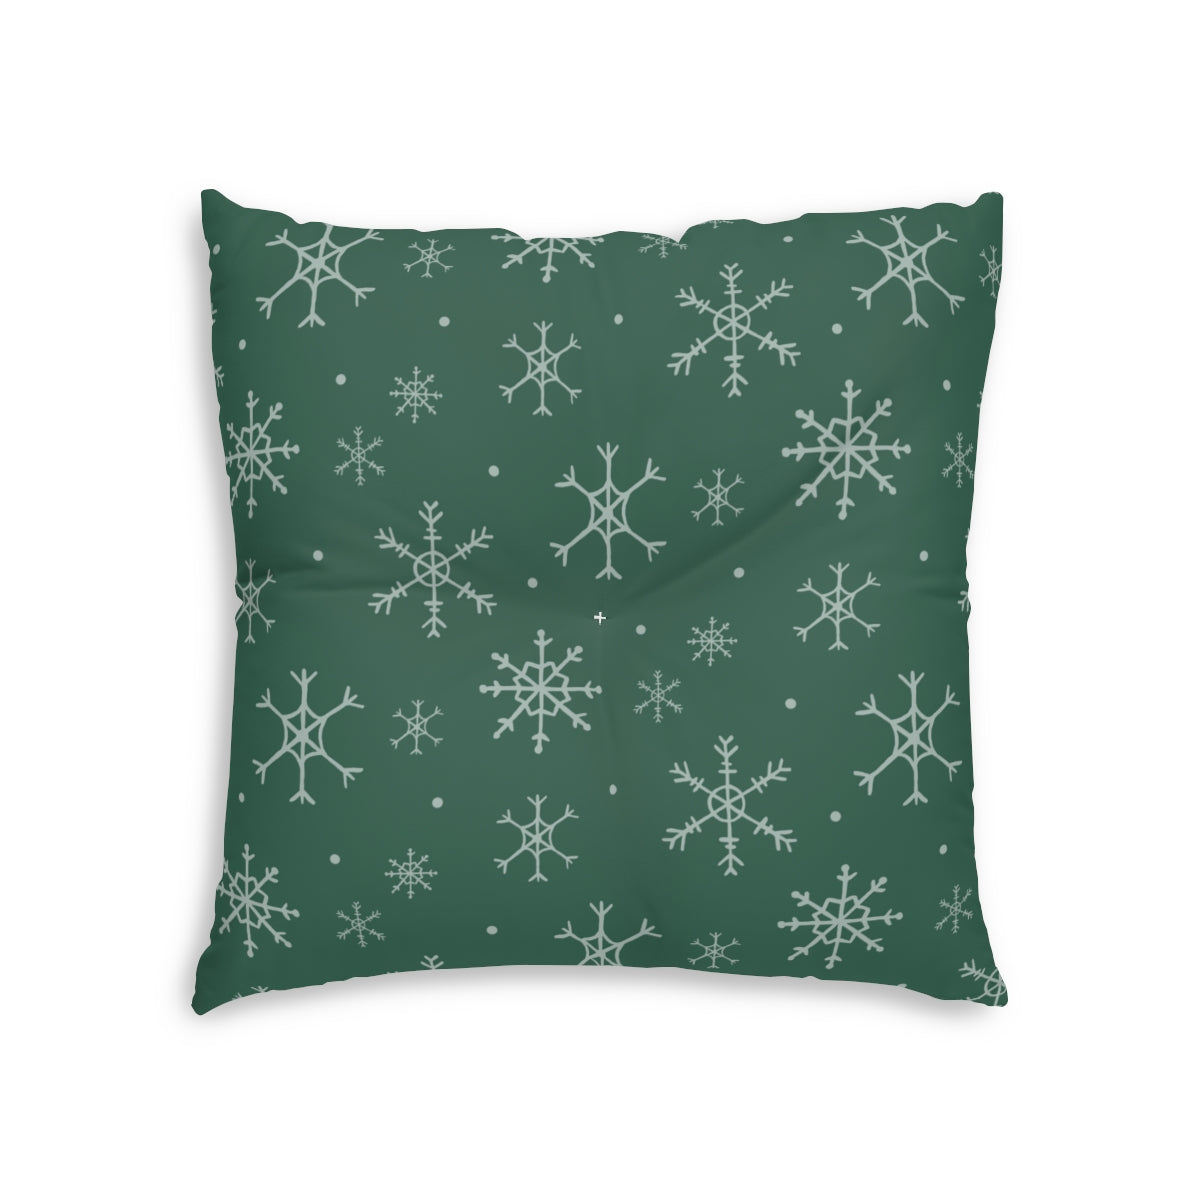 Lifestyle Details - Green Square Tufted Holiday Floor Pillow - Snowflakes - 26x26 - Front View